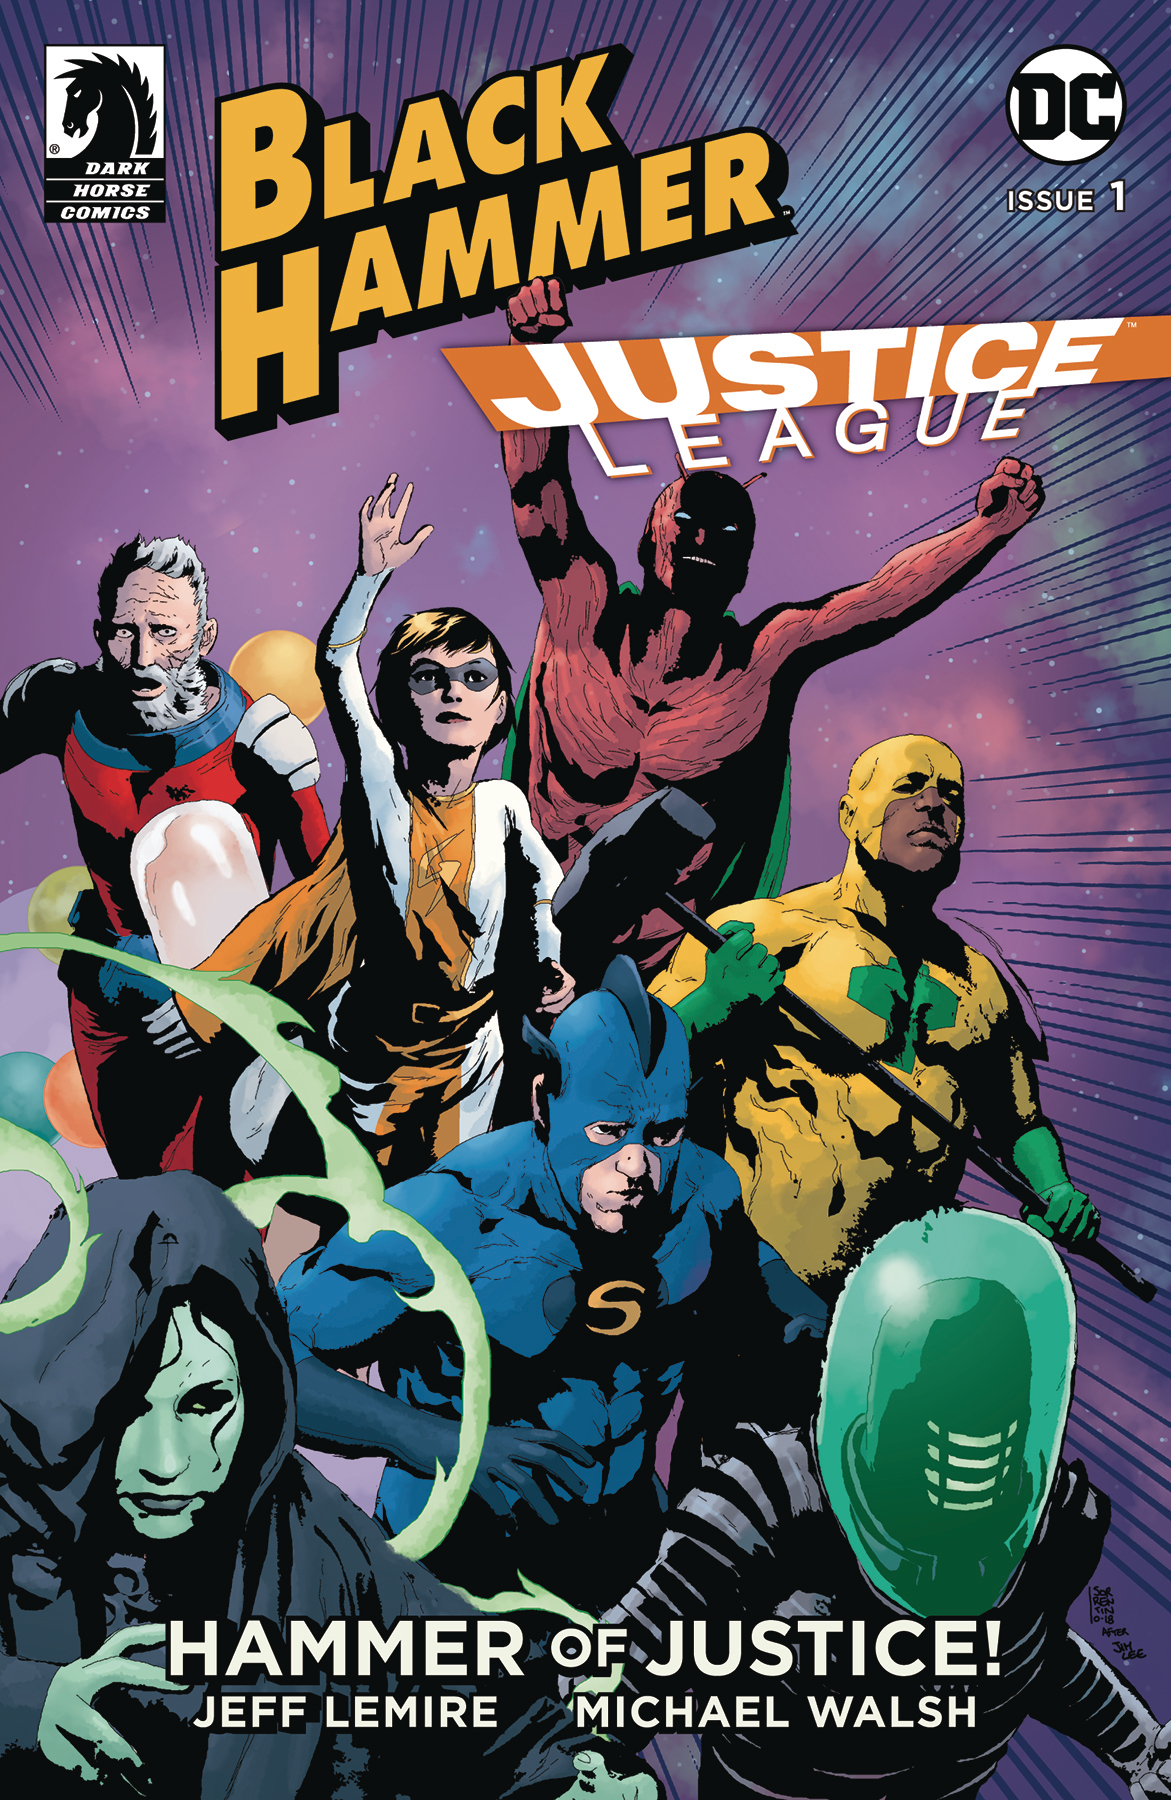 Black Hammer Justice League no. 1 (Sorrentino Variant) (1 of 5) (2019 Series)